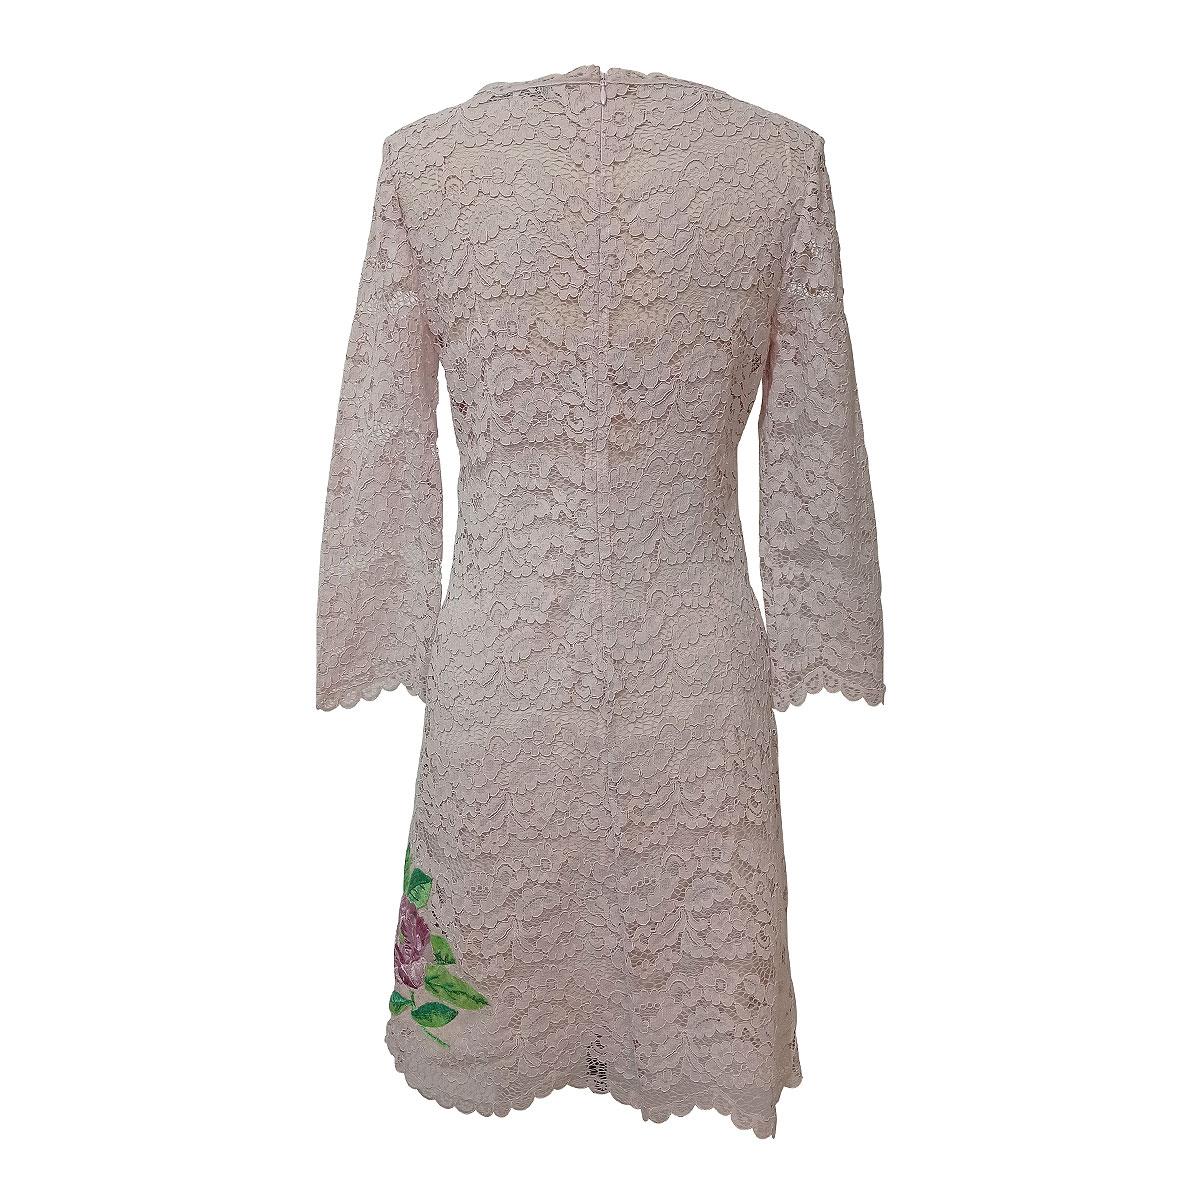 Fantastic dress by Blumarine
Lace dress
Nylon (60%) and cotton
Silk lining
Antique rose color
3/4 sleeve
Amazing total construction of fine lace
Multicolored floral embroideries
Shoulder/hem length cm 85 (33,4 inches)
Shoulder cm 38 (14,9